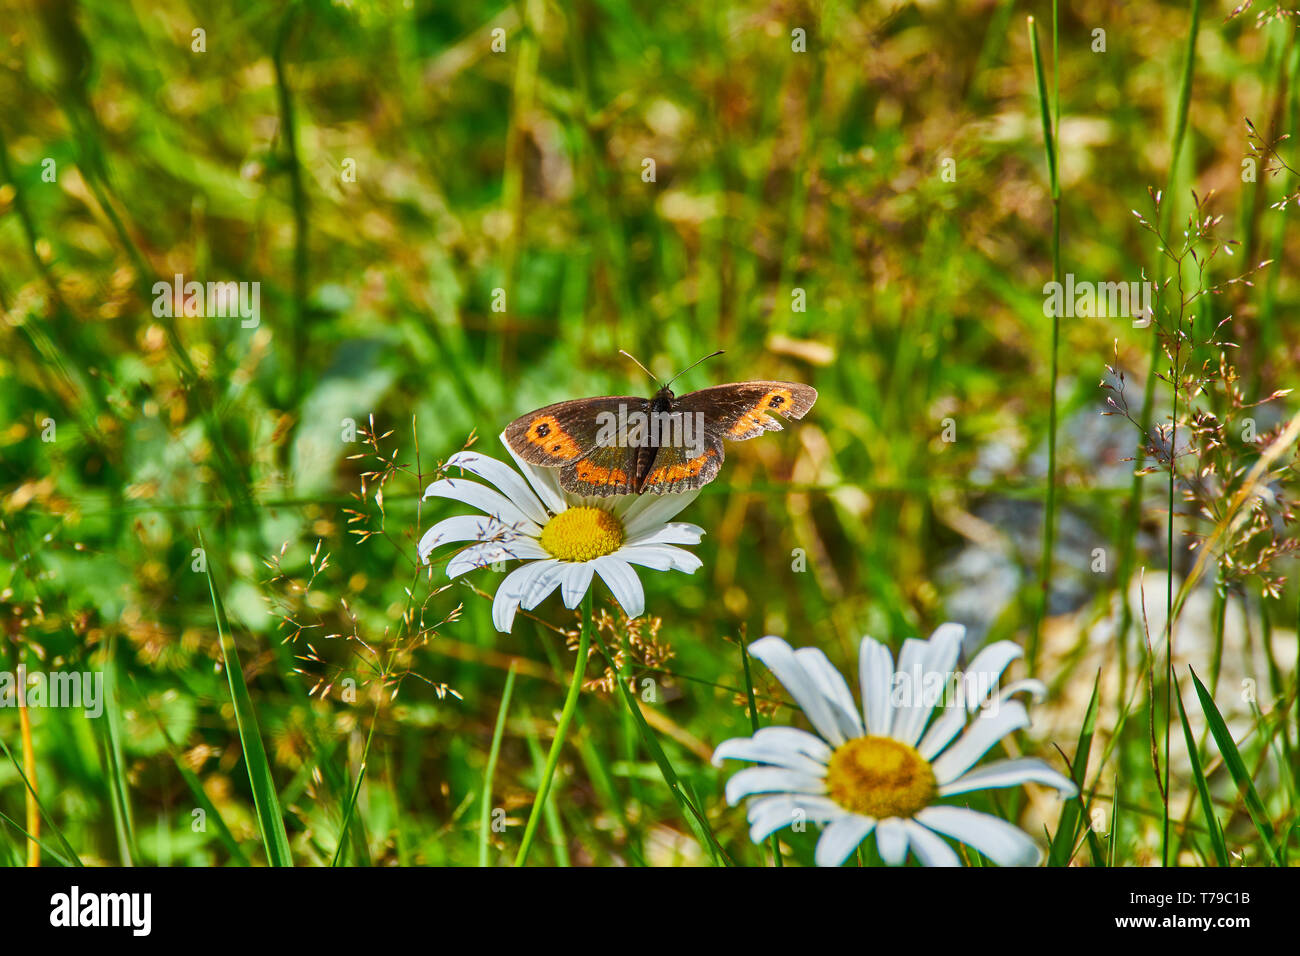 Brown butterfly on a daisy flower Stock Photo